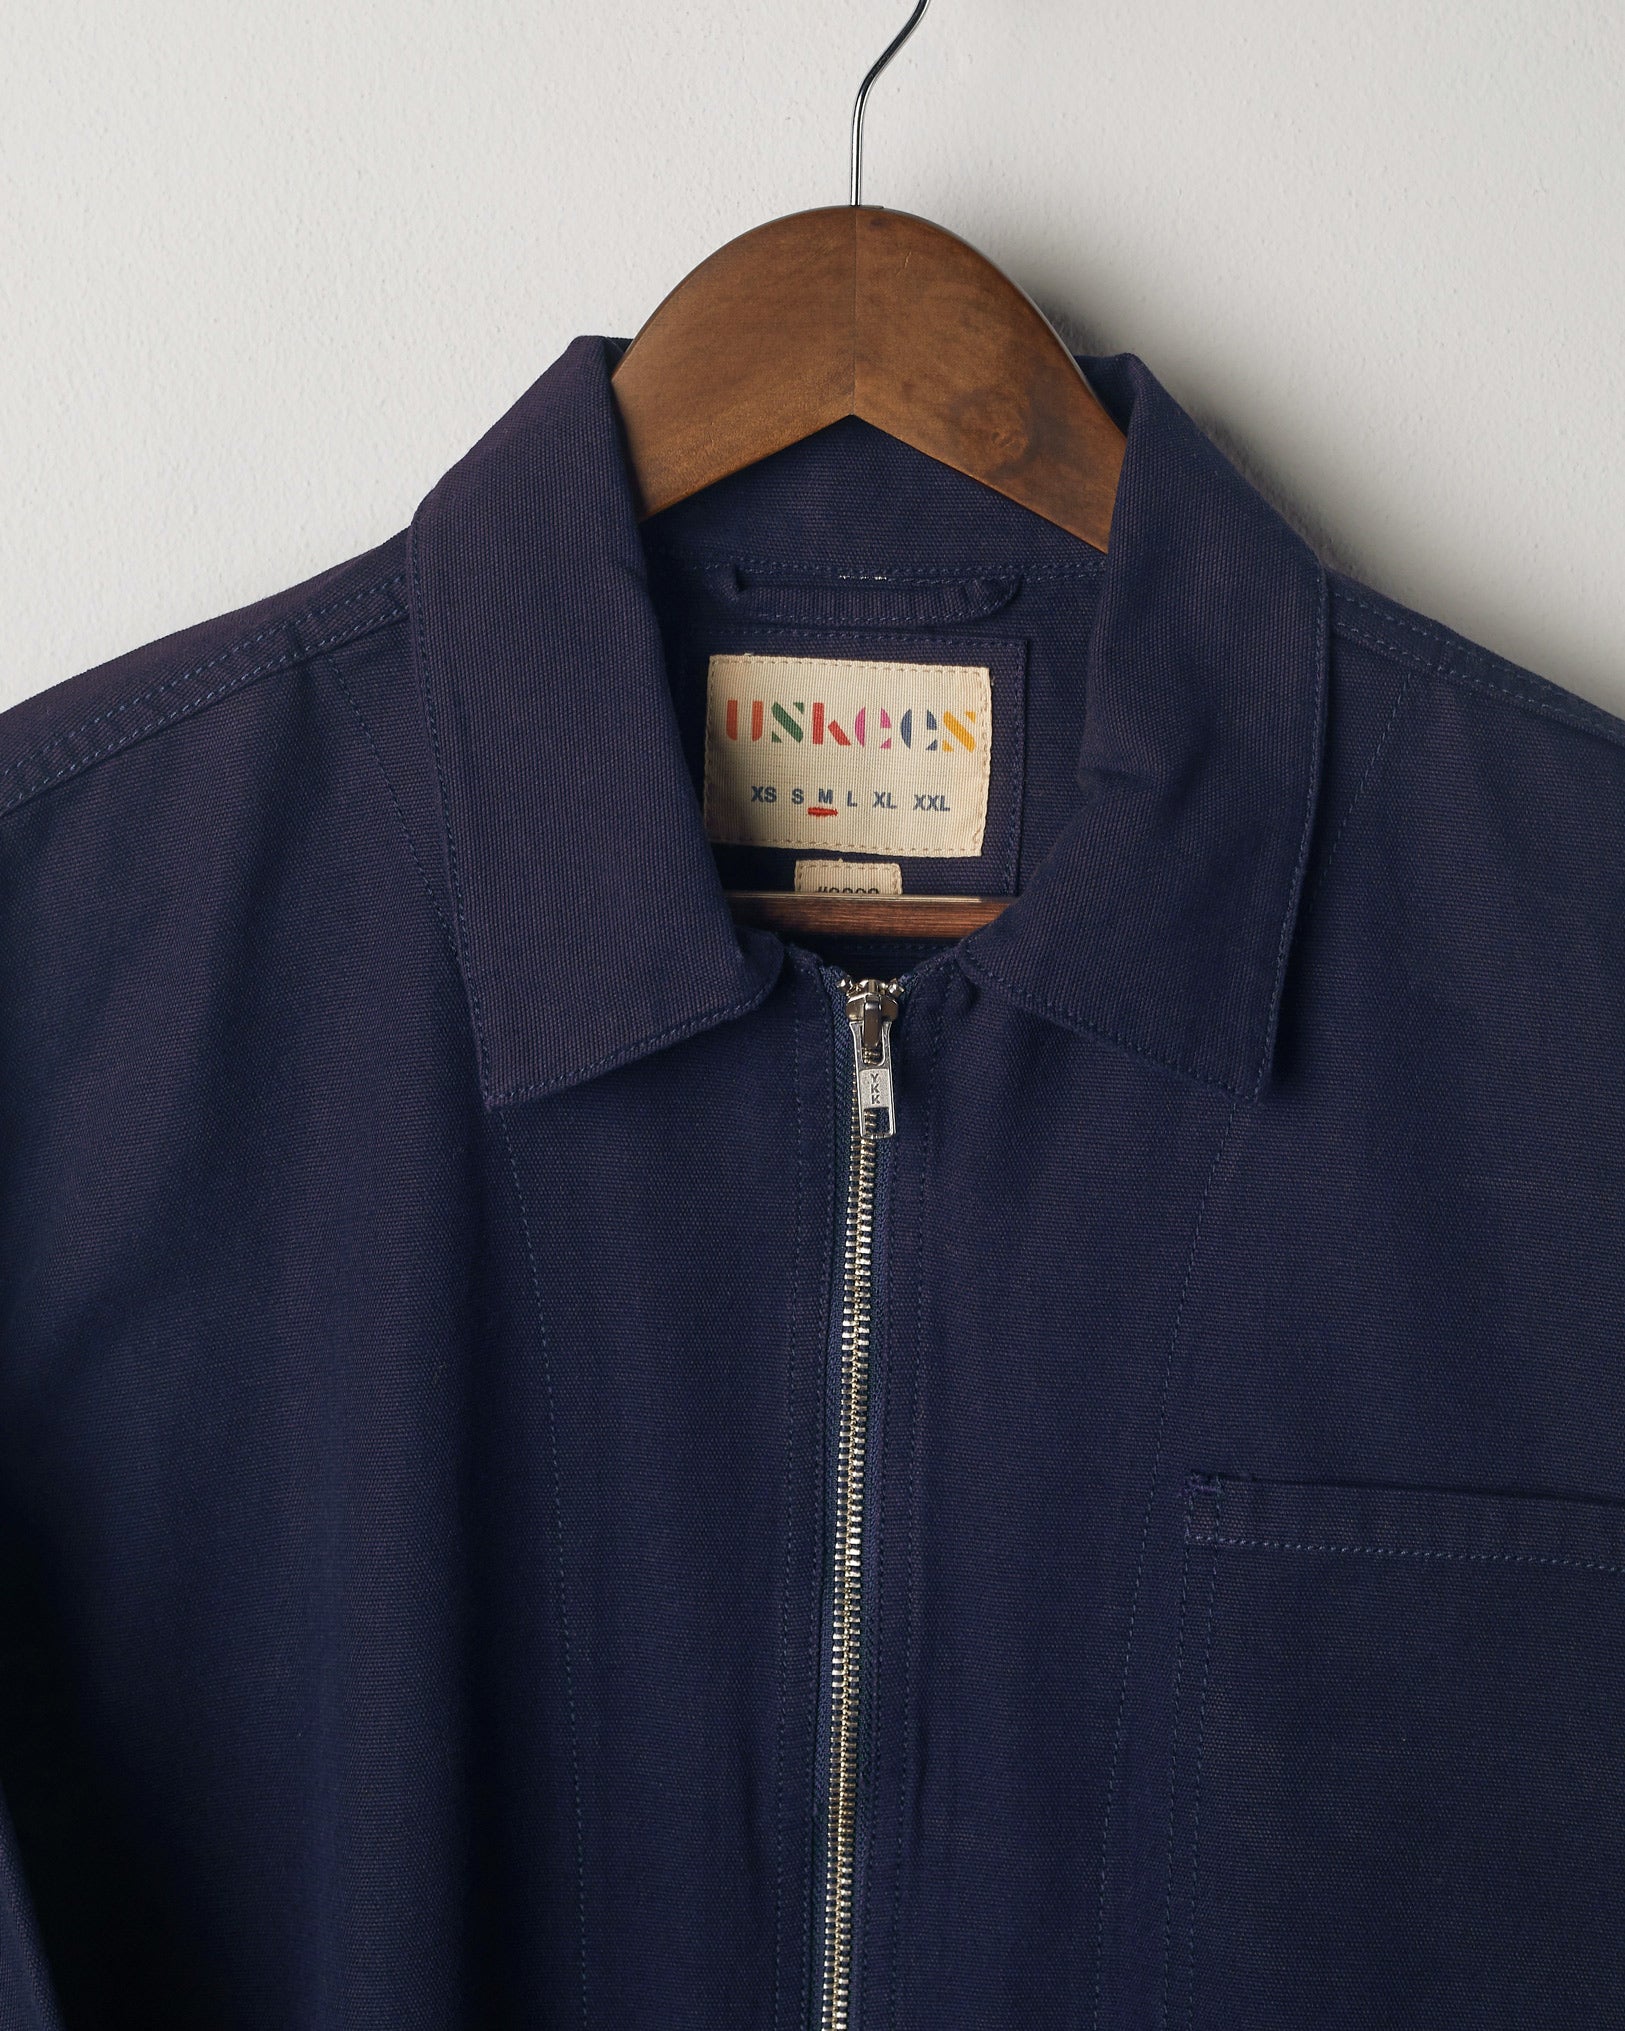 Close-up view of the collar of the Uskees #3002, midnight blue zip-front jacket. Zipped up to demonstrate collar shape and boxy jacket silhouette.